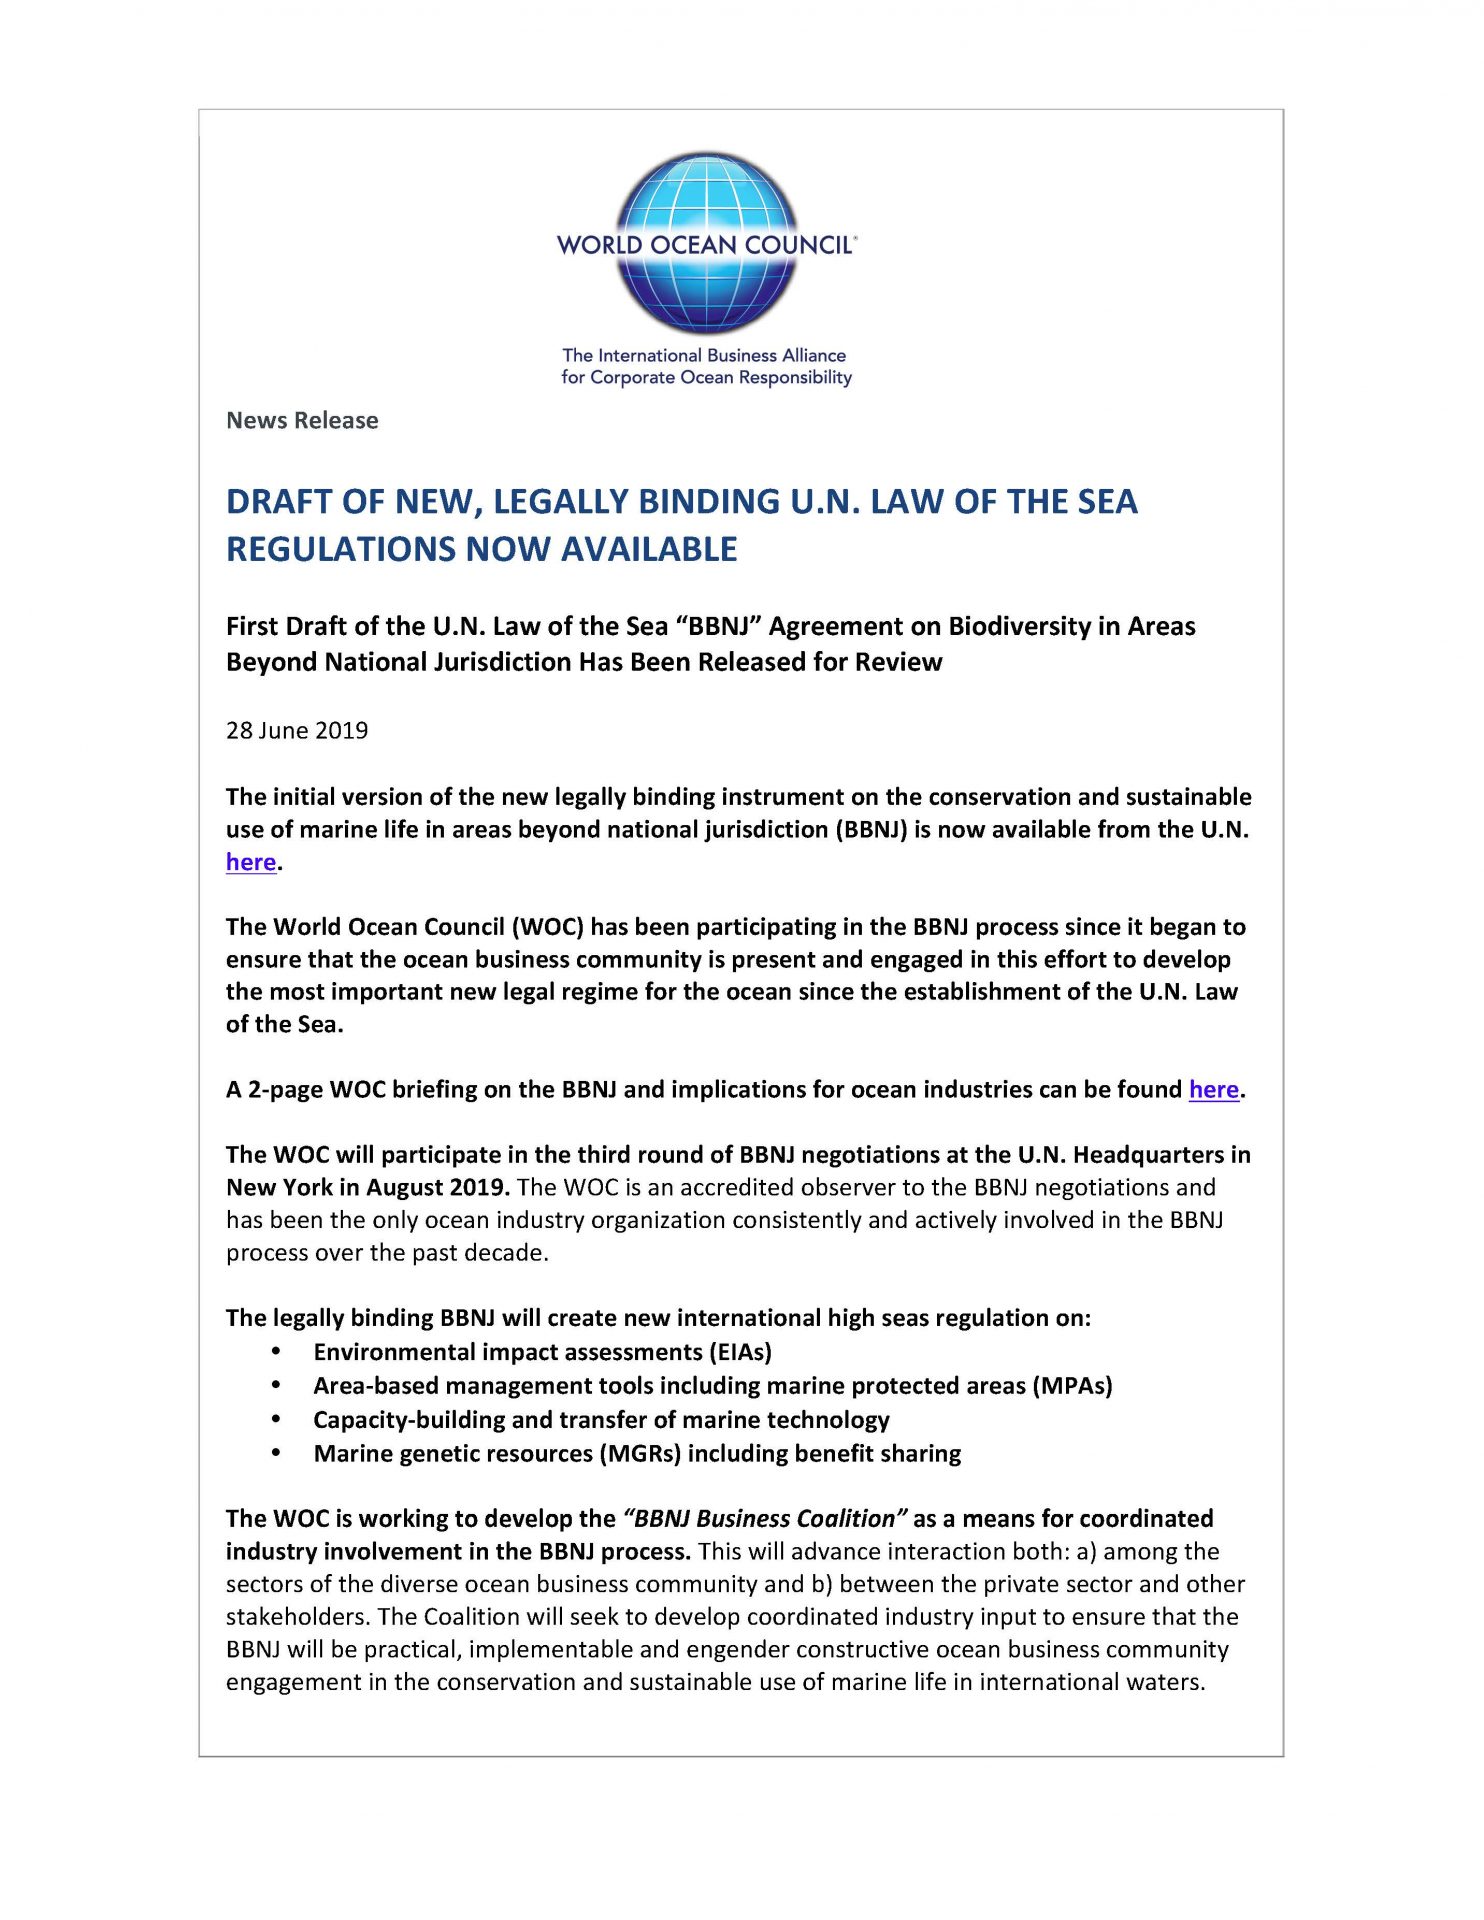 Draft of New, Legally Binding U.N. Law of the Sea Regulations Now Available - 28 June 2019